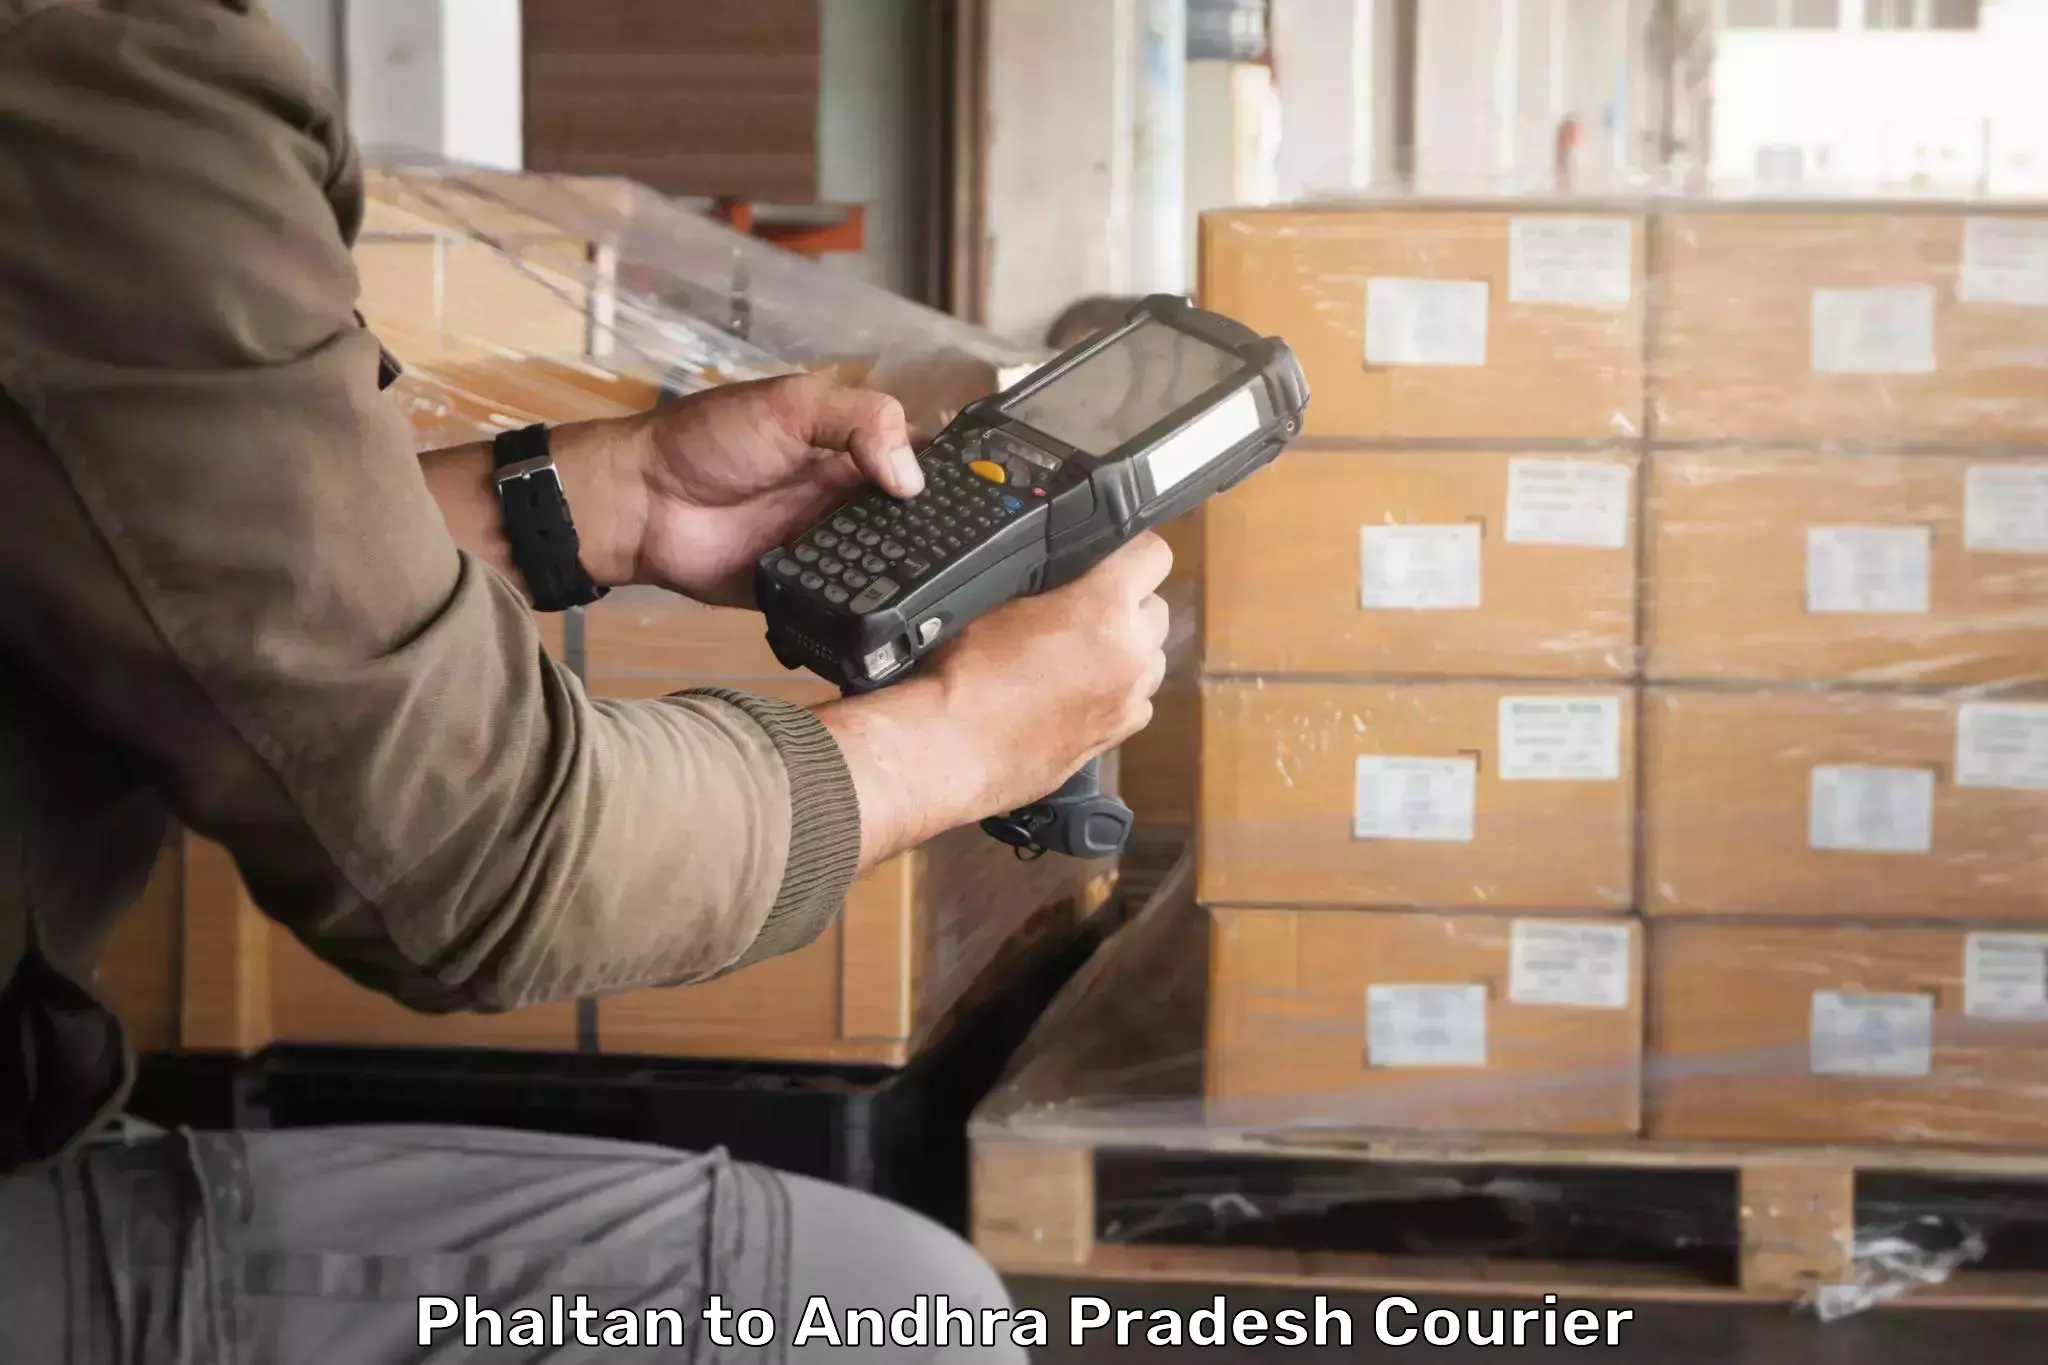 State-of-the-art courier technology Phaltan to Srisailam